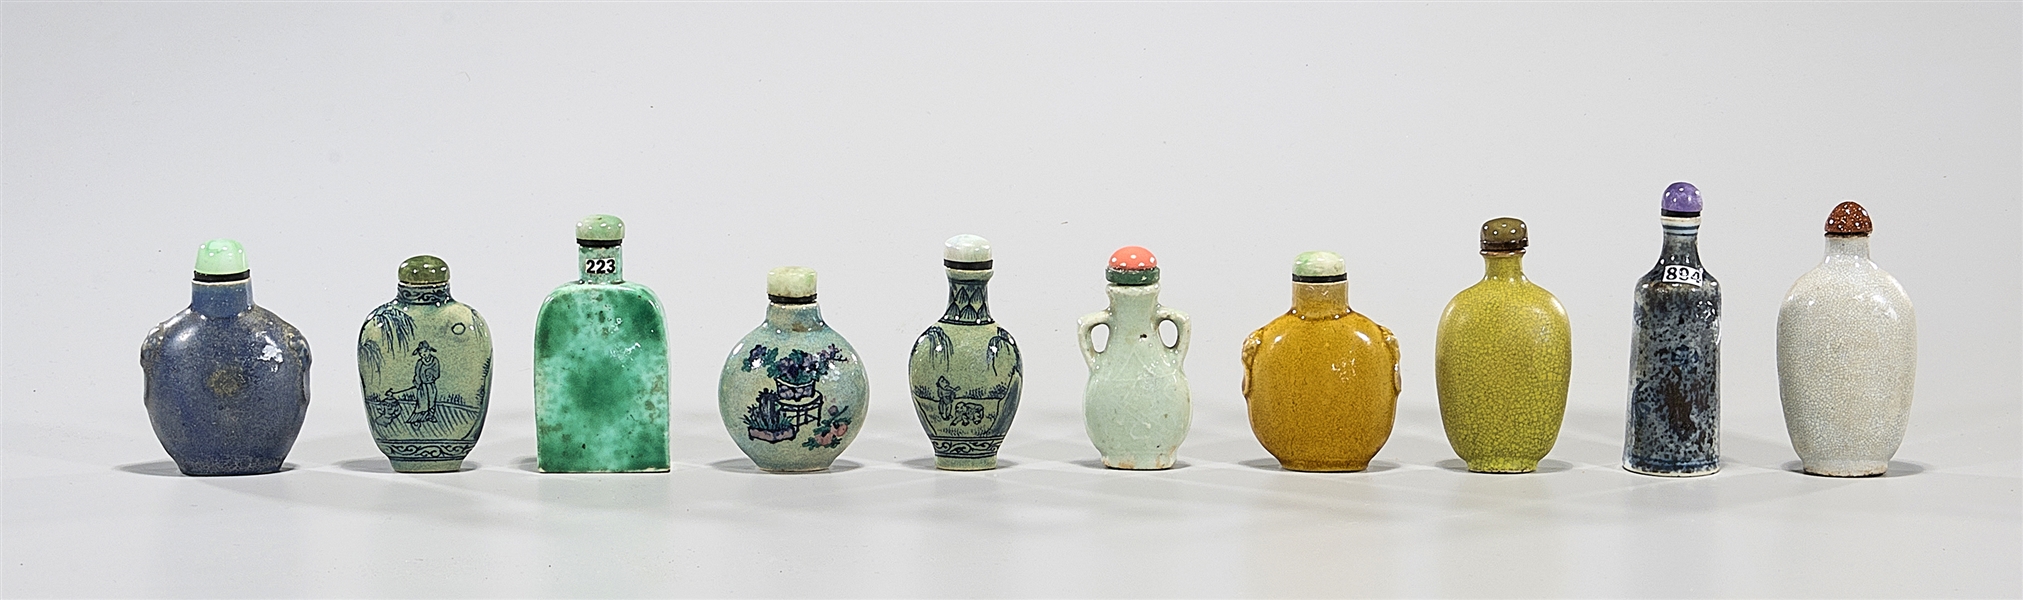 Group of Ten Chinese Porcelain Snuff Bottles